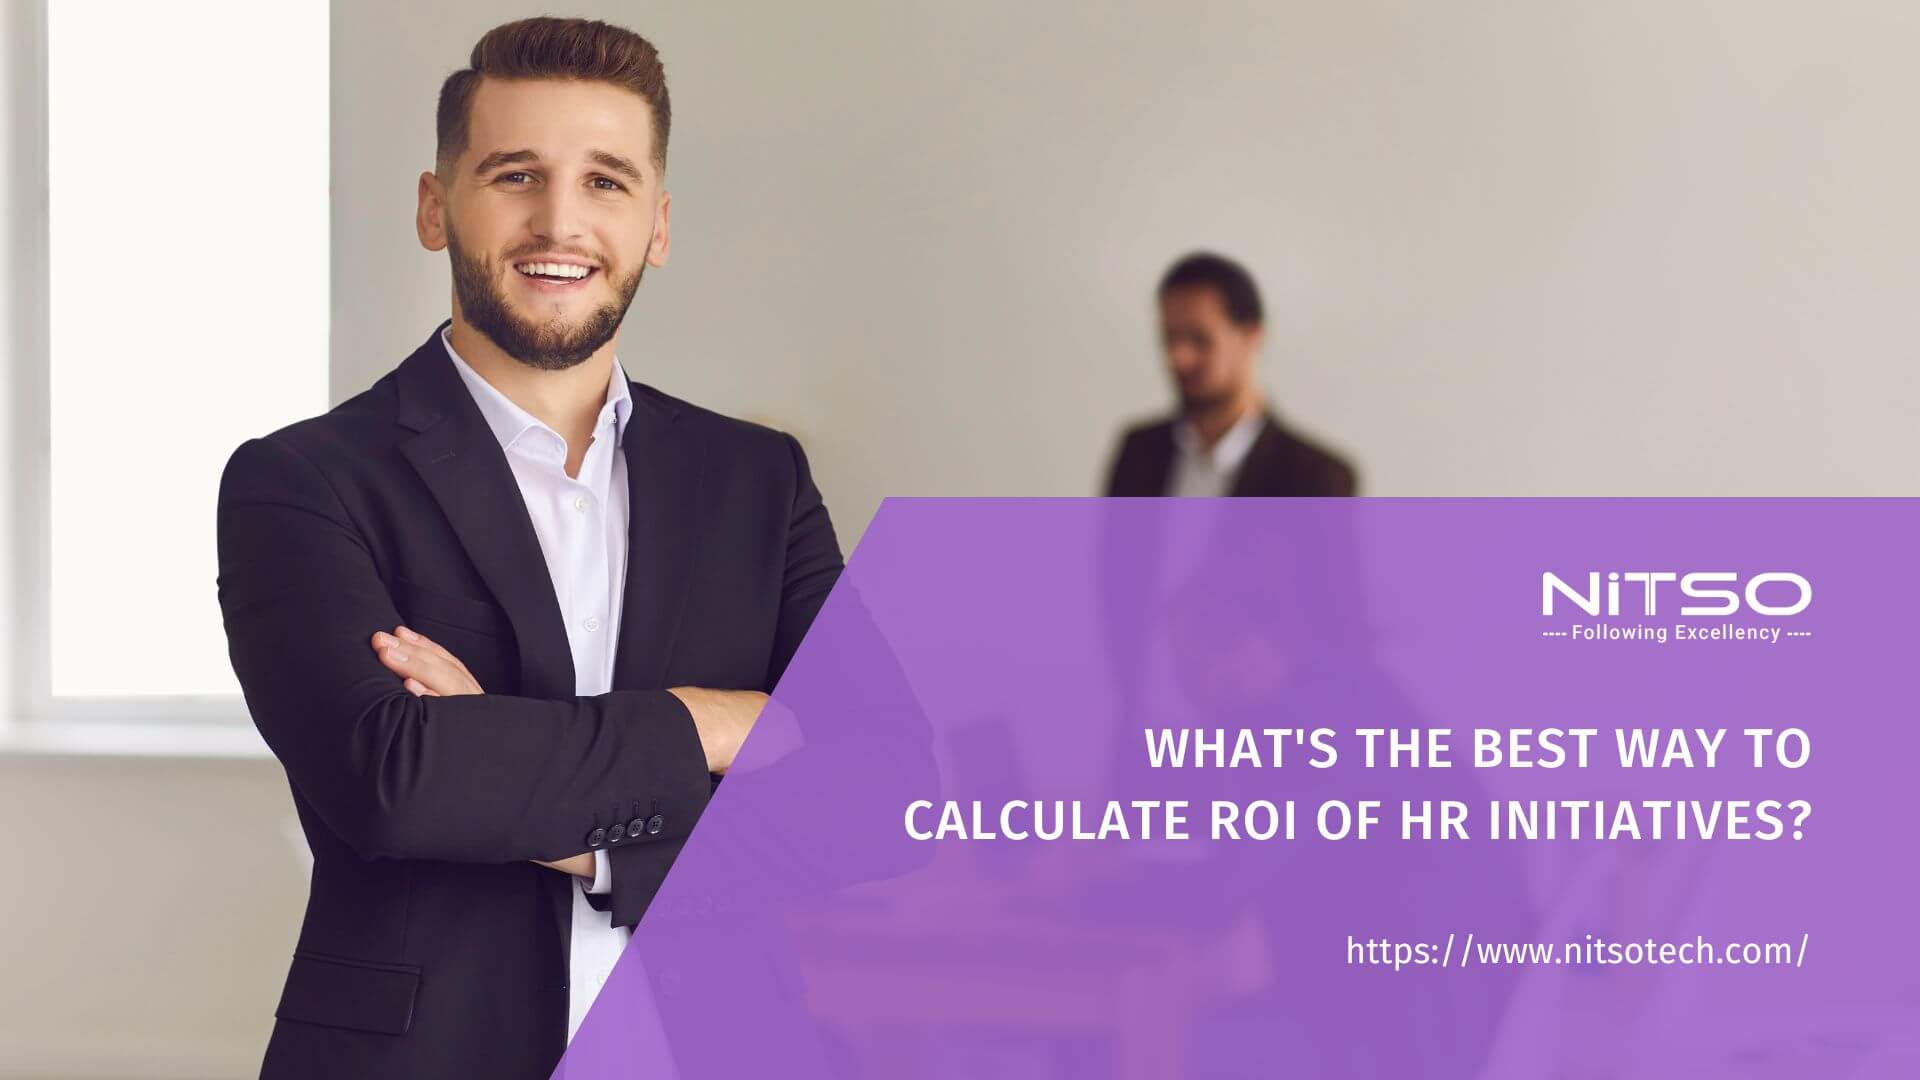 How to Measure the ROI of HR Initiatives Effectively?